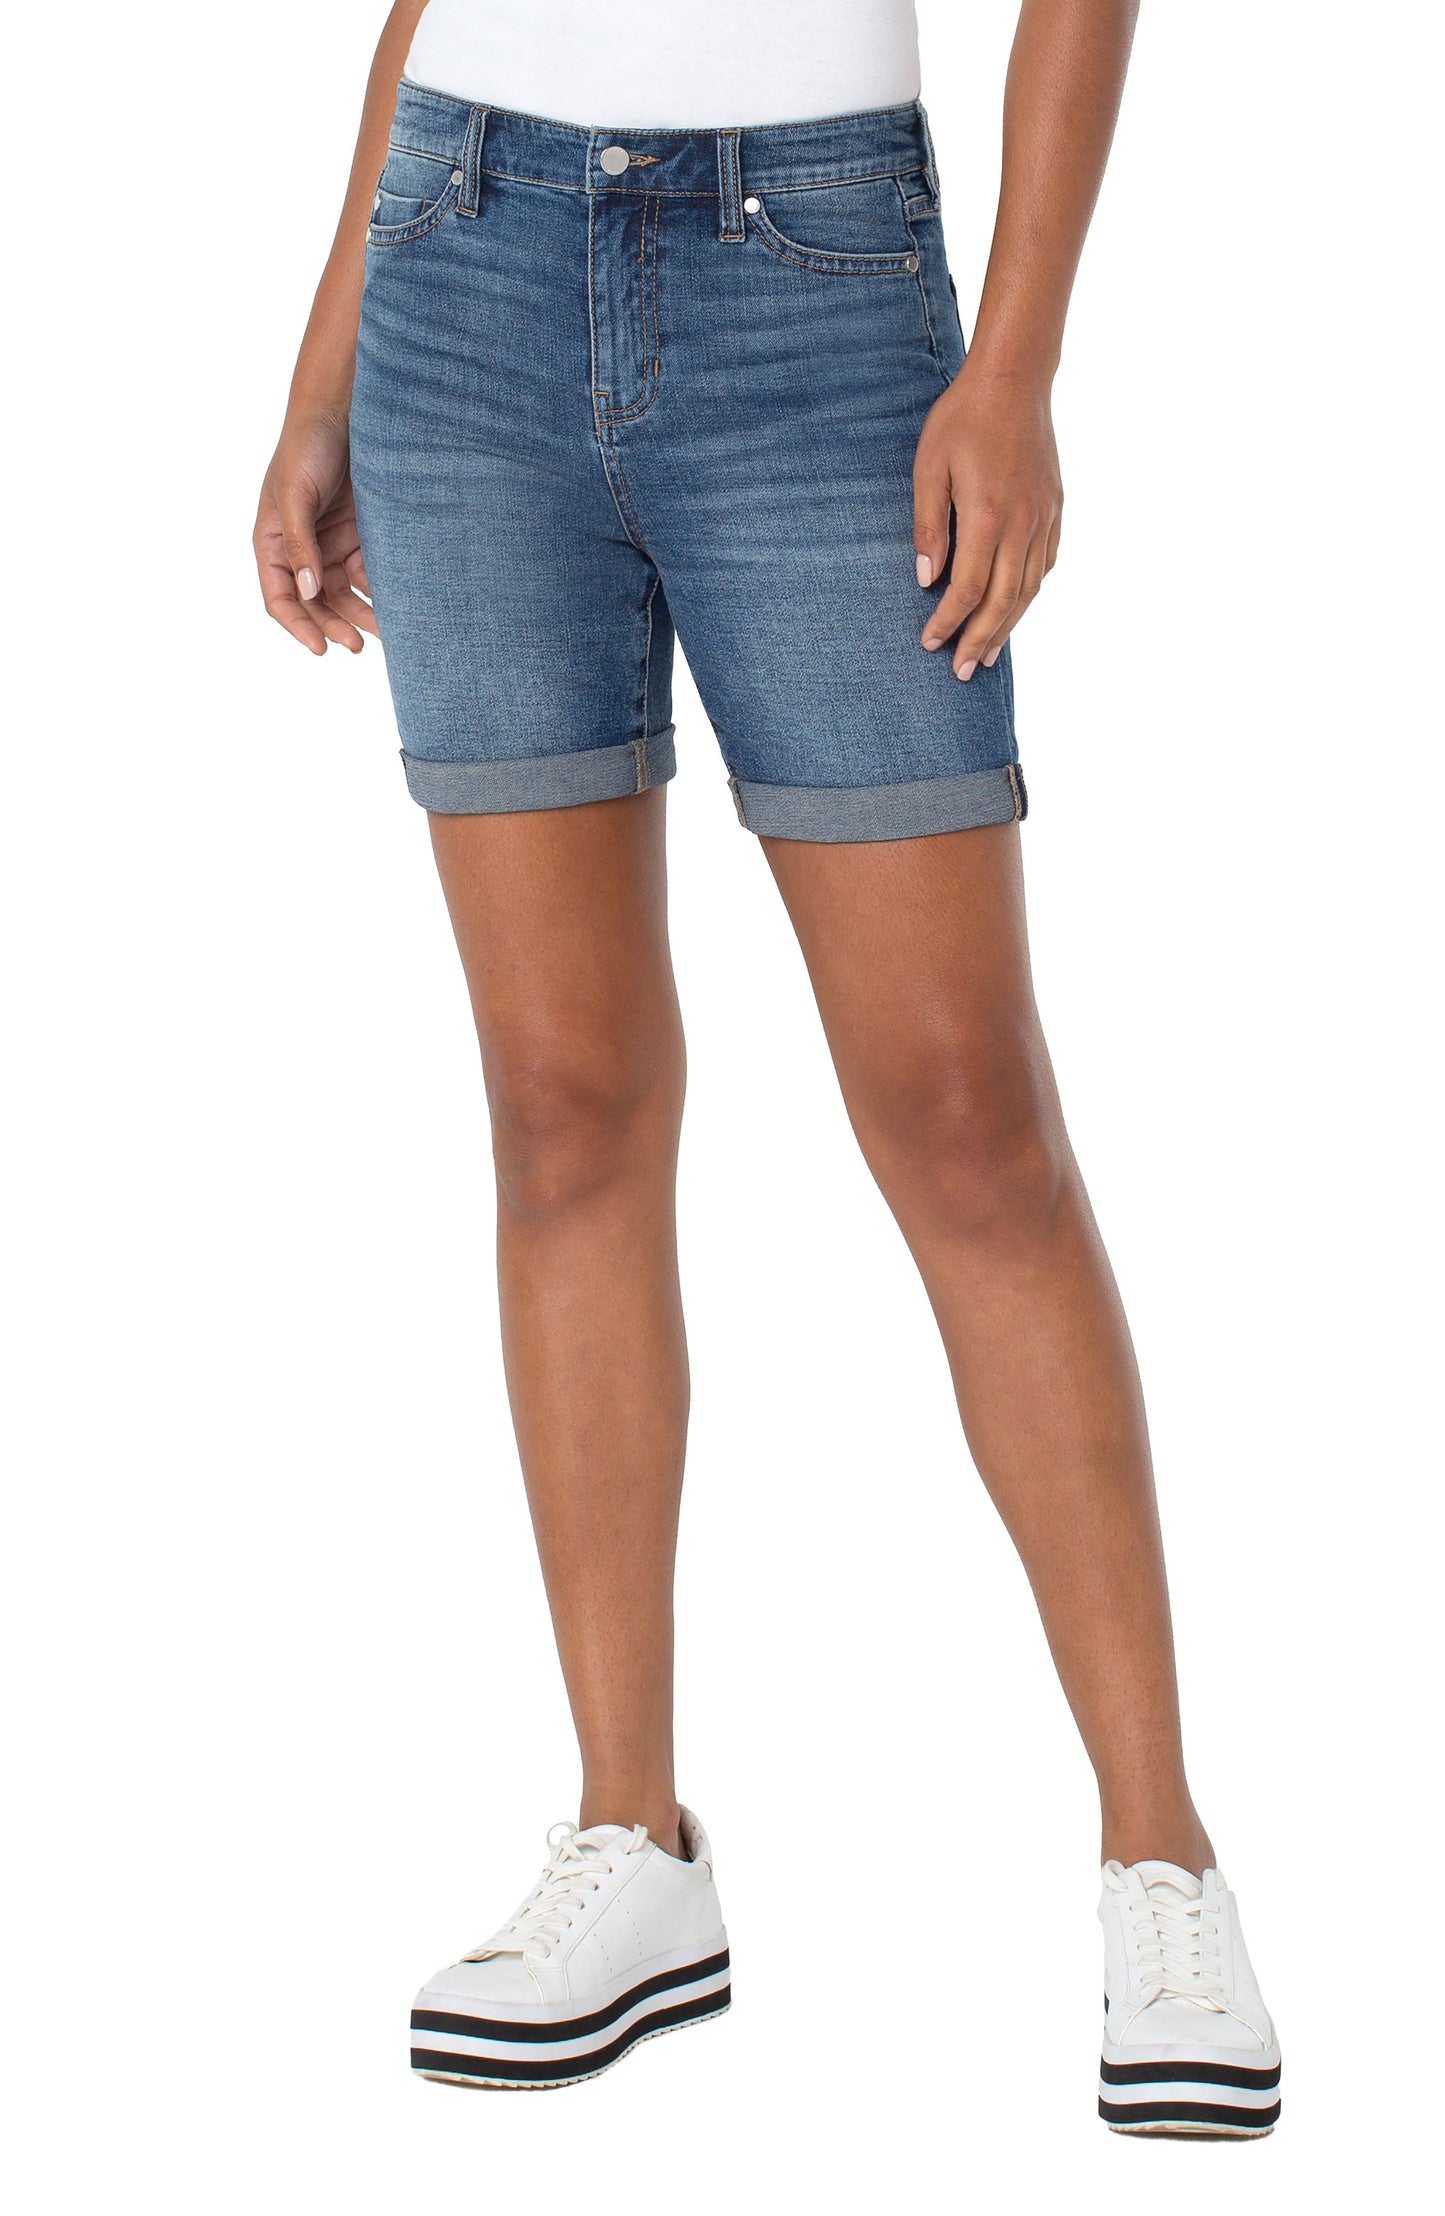 LIVERPOOL KRISTY HI-RISE SHORT WITH DOUBLE ROLL CUFF 7"-9" INSEAM